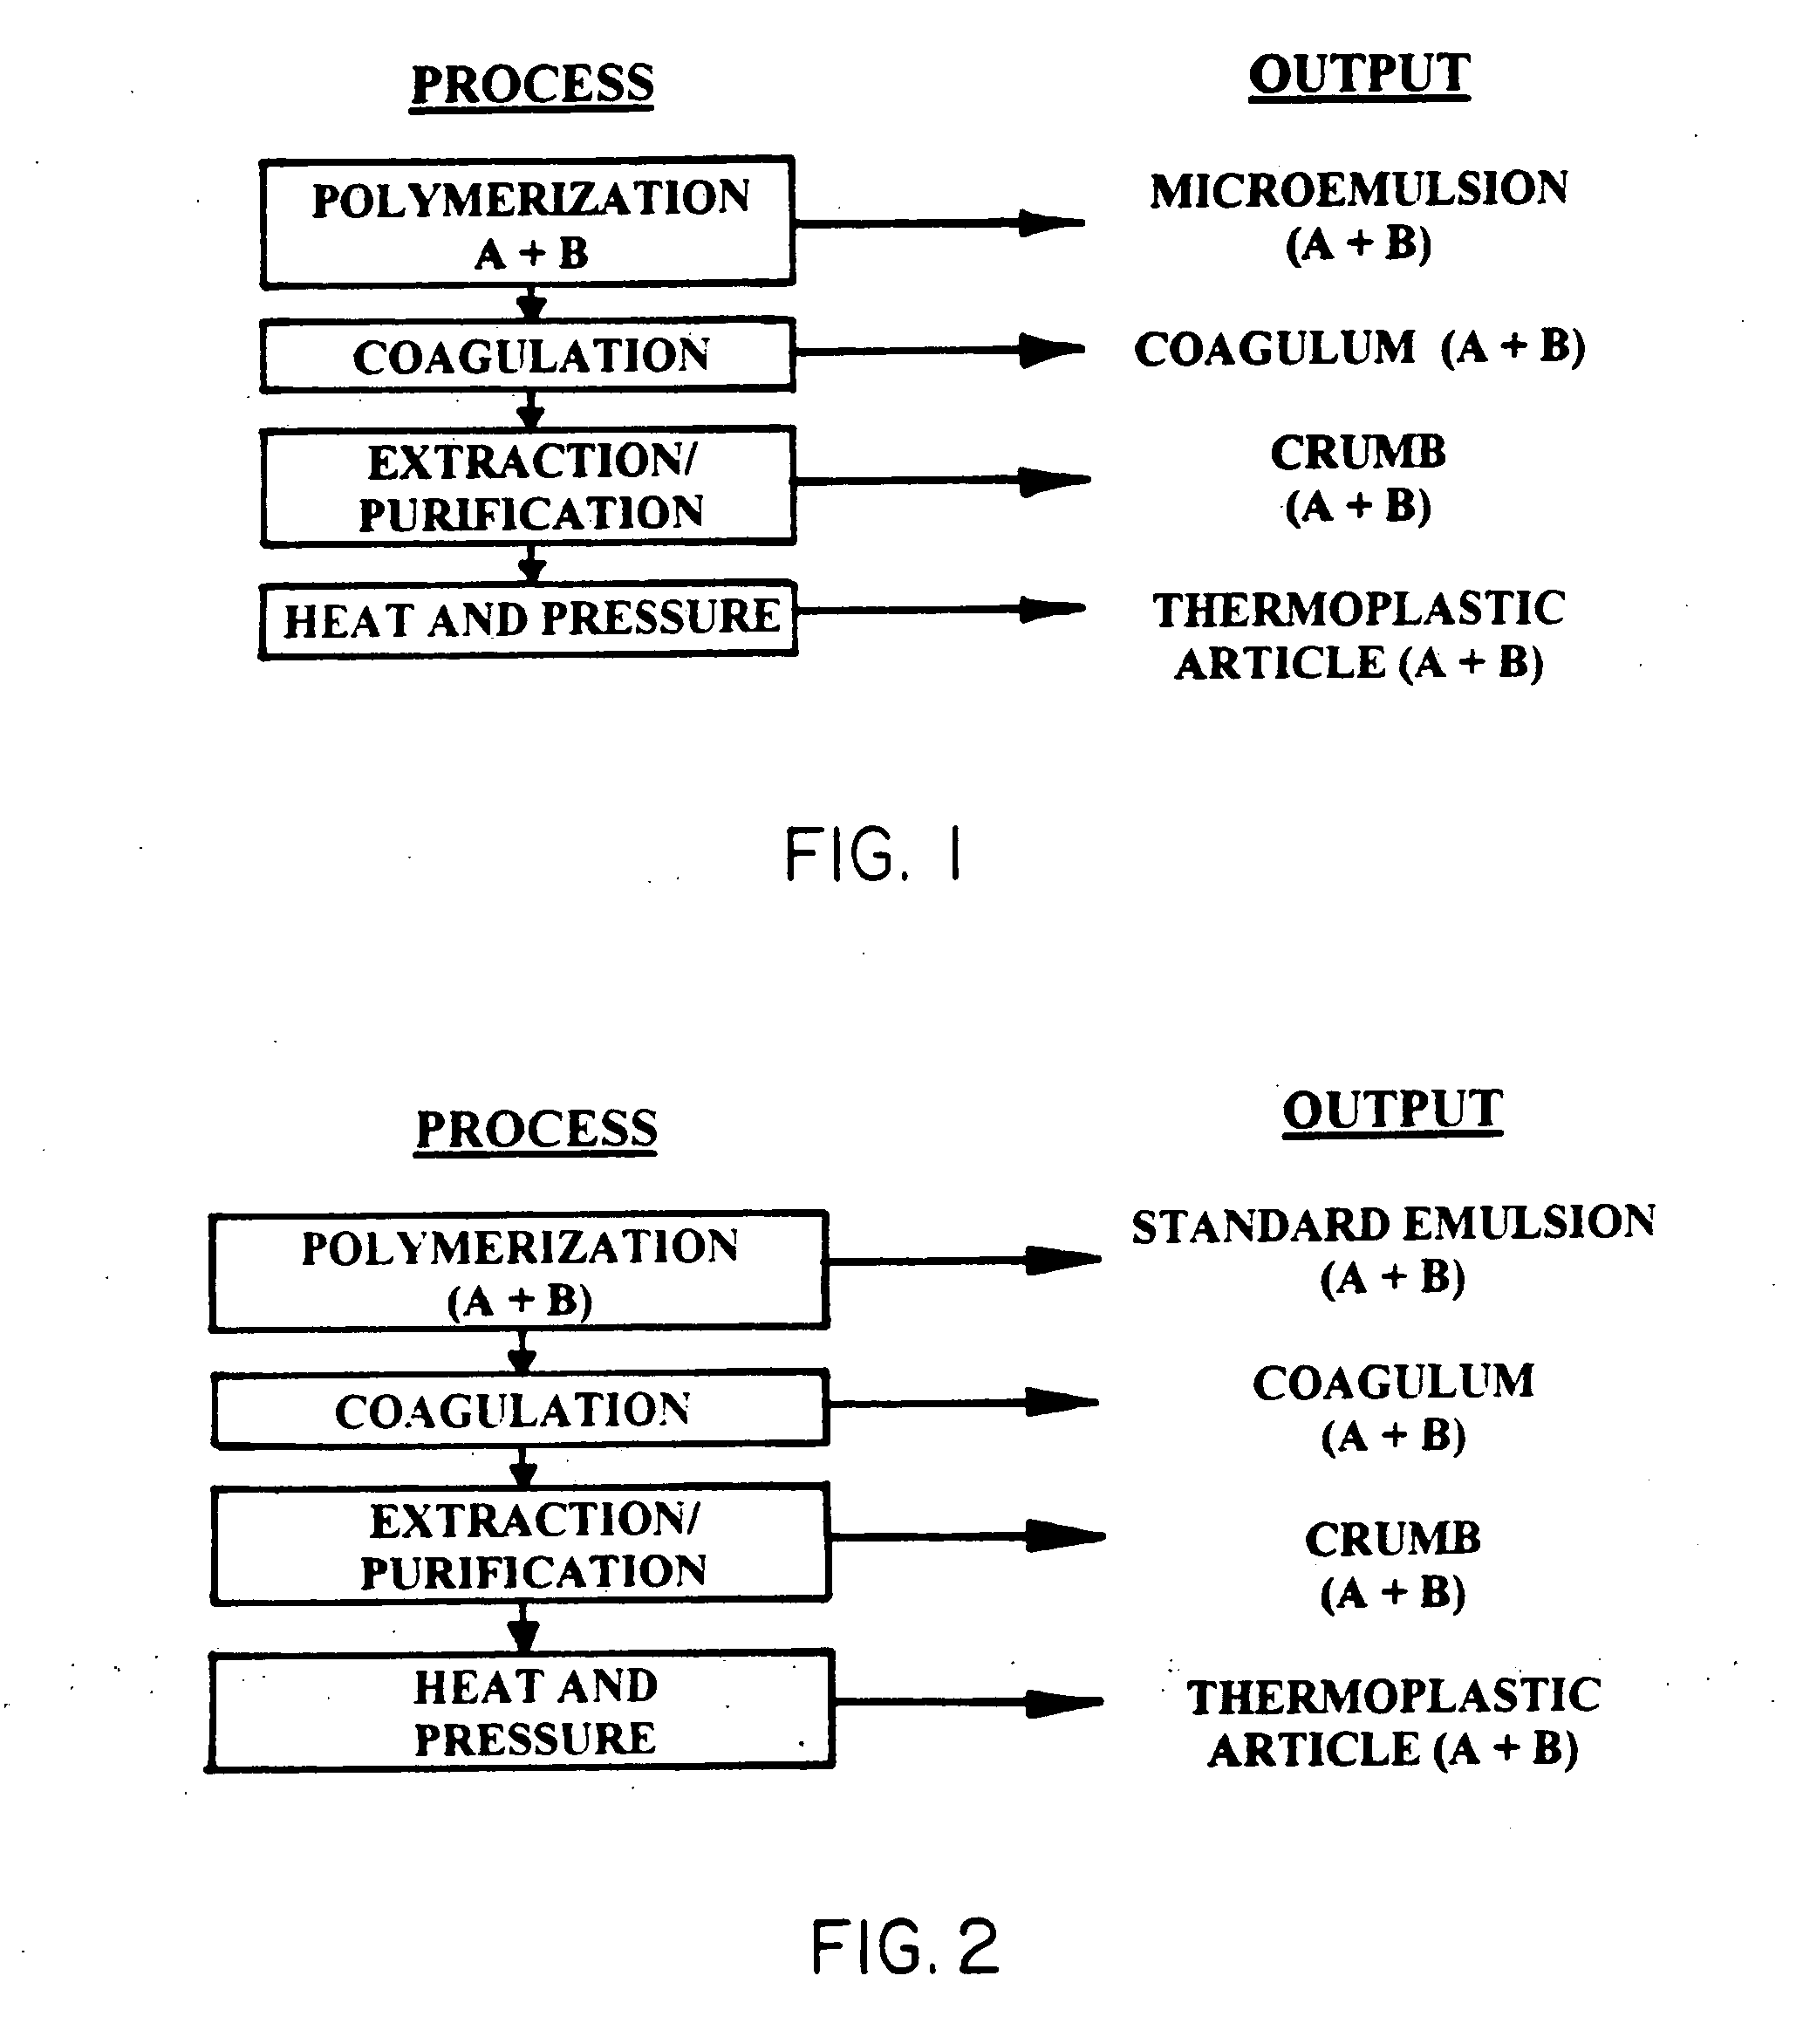 Thermoplastic copolymer of tetrafluoroethylene and perfluoromethyl vinyl ether and medical devices employing the copolymer